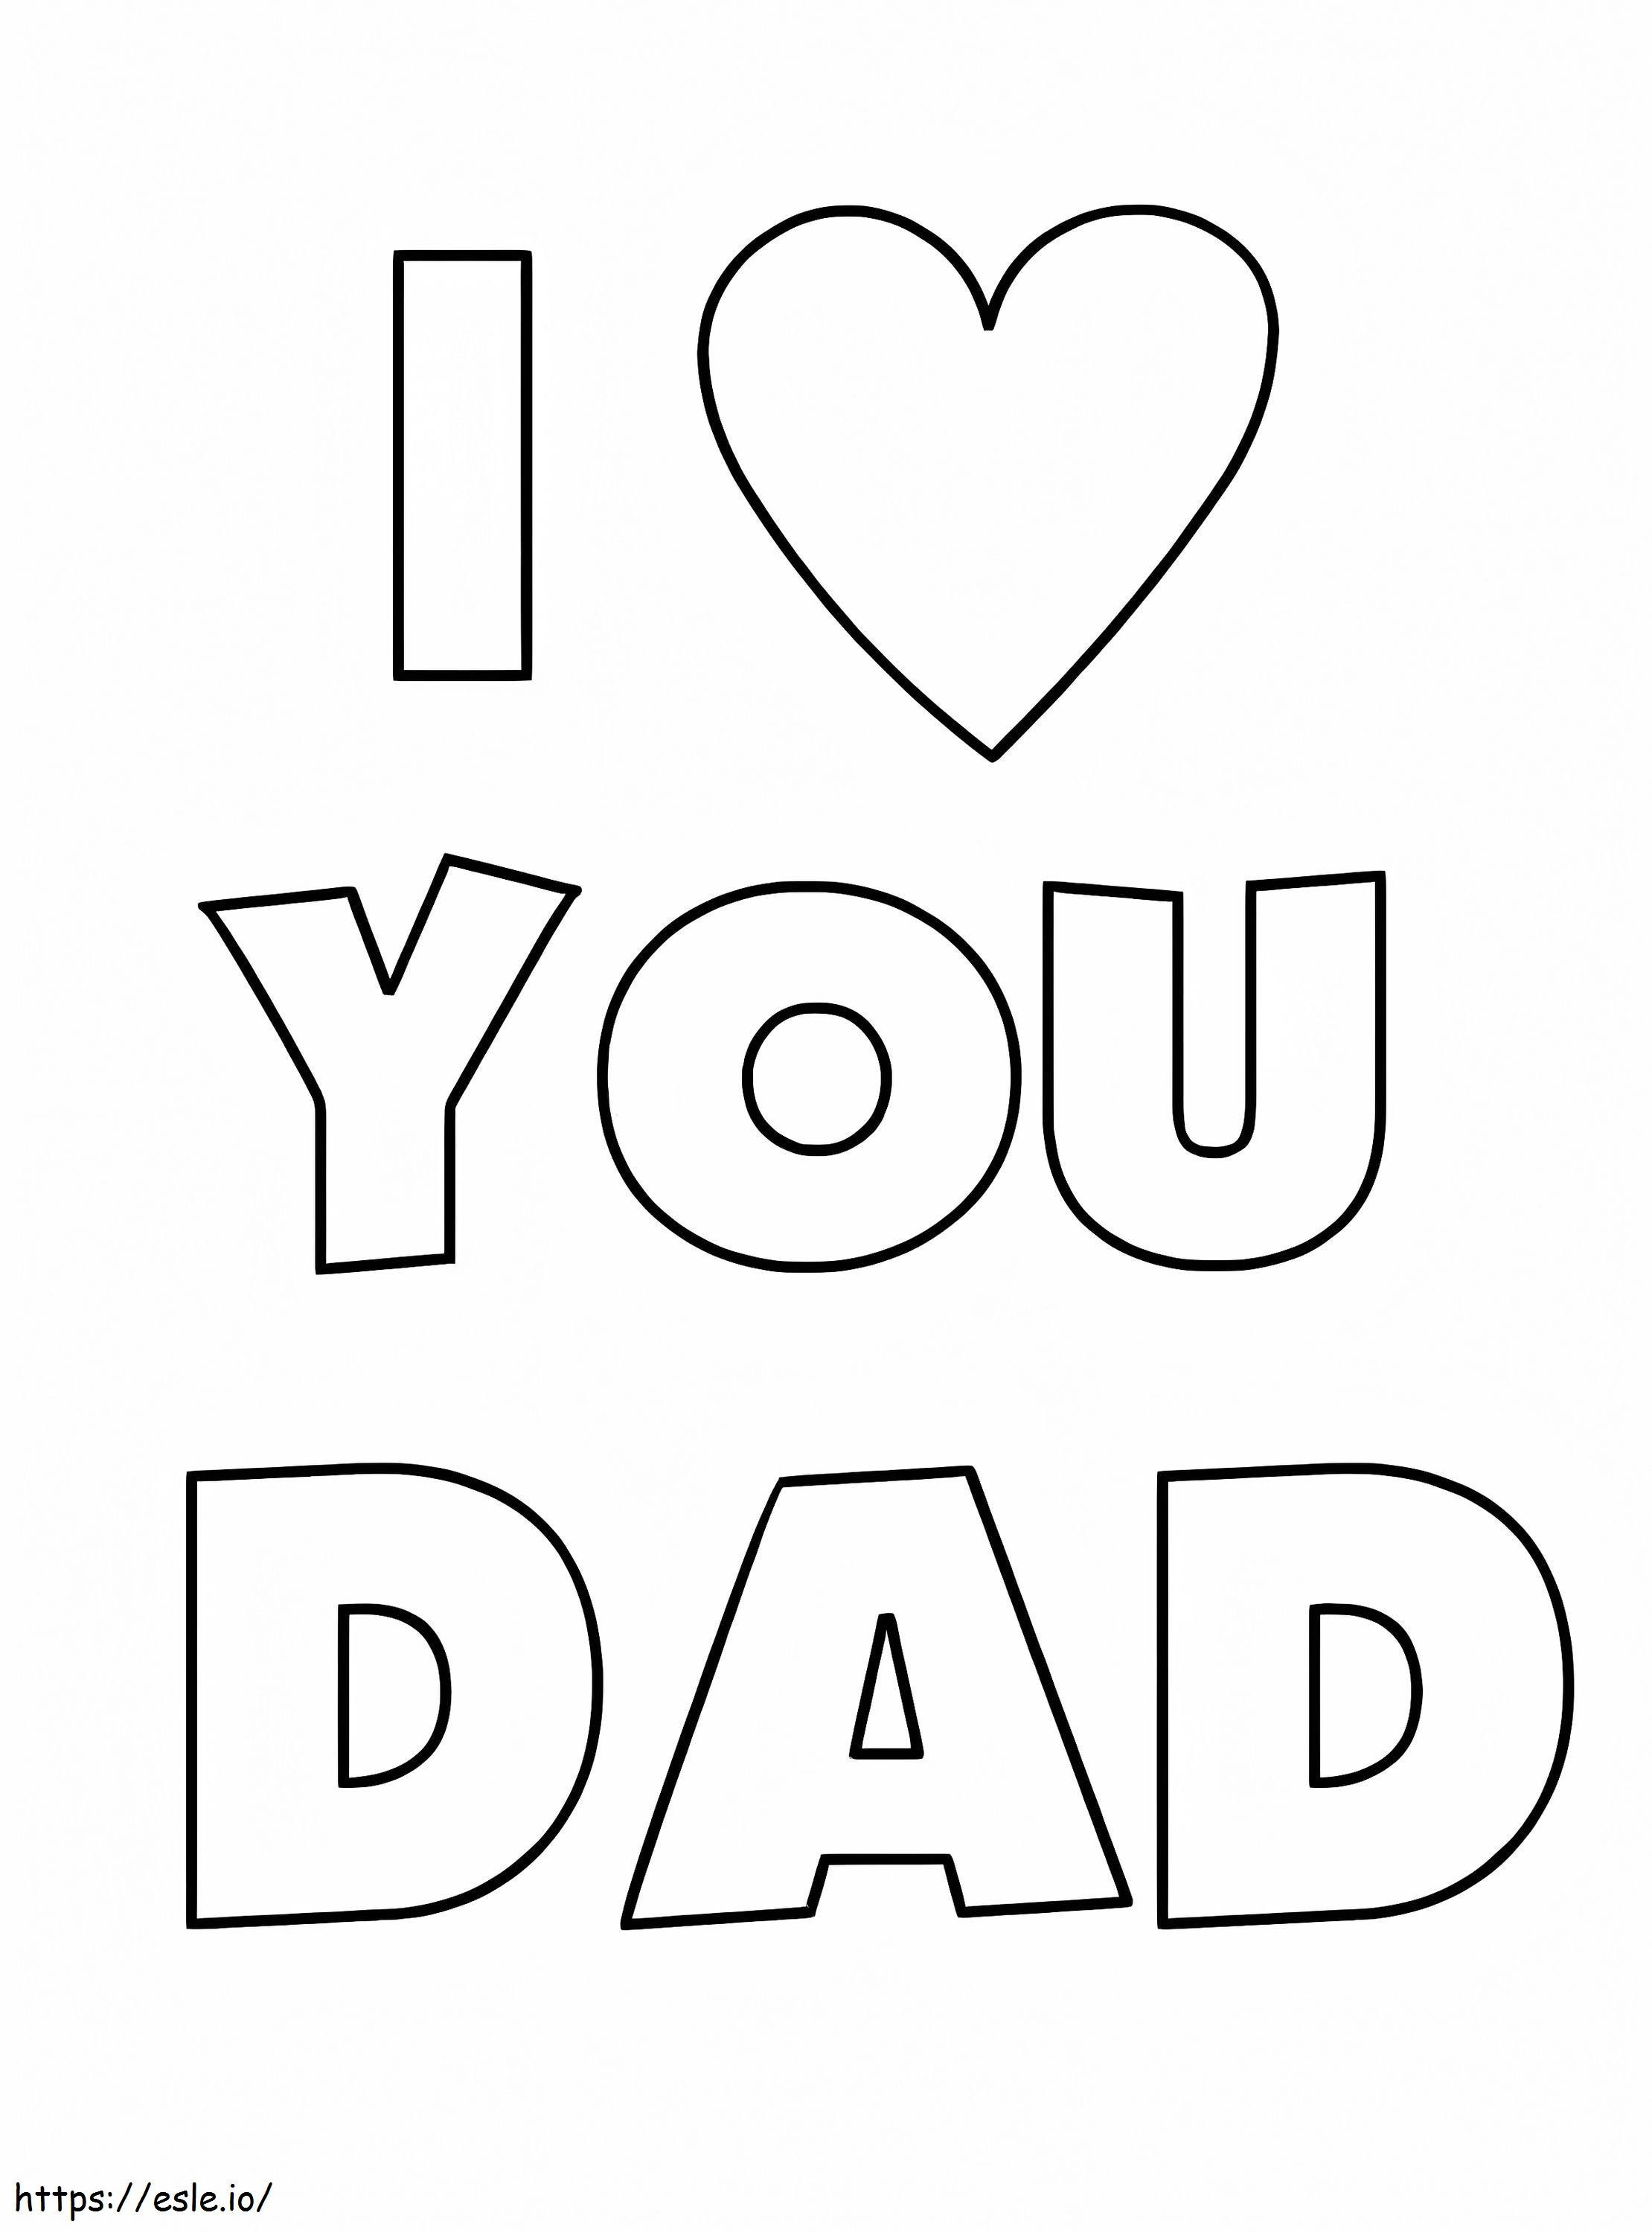 I Love You Dad coloring page